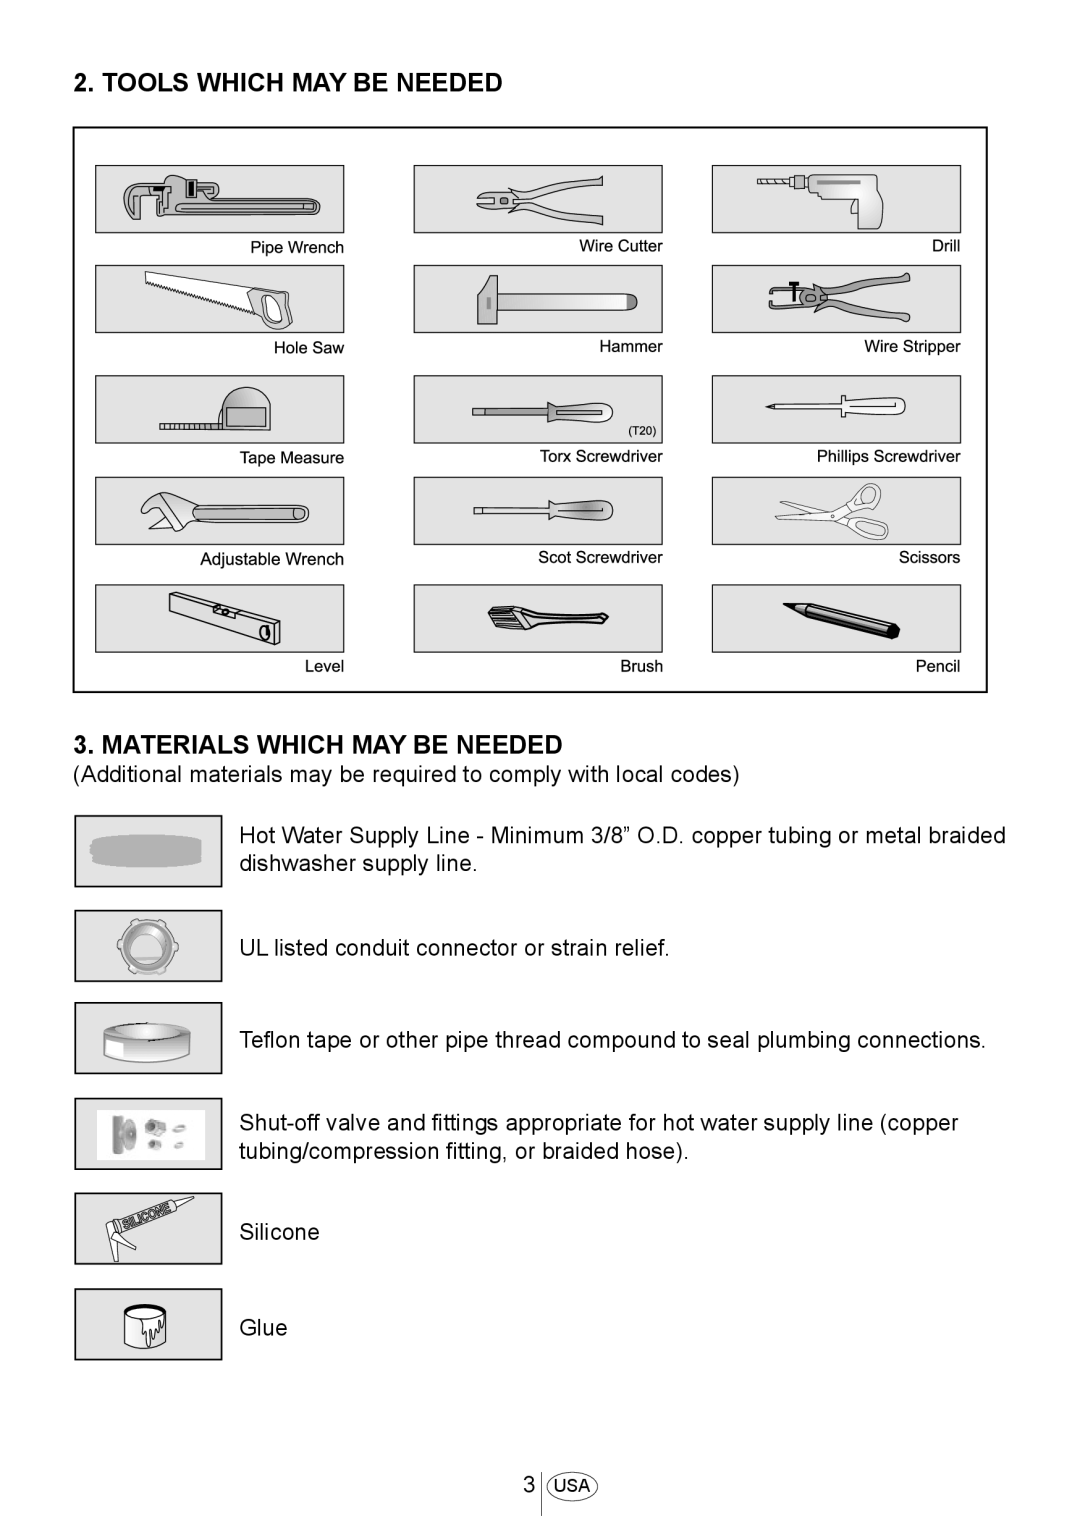 Blomberg DWS 54100 SS, DWS 54100 FBI installation manual TOOLS WHICH MAY BE NEEDED 3. MATERIALS WHICH MAY BE NEEDED 